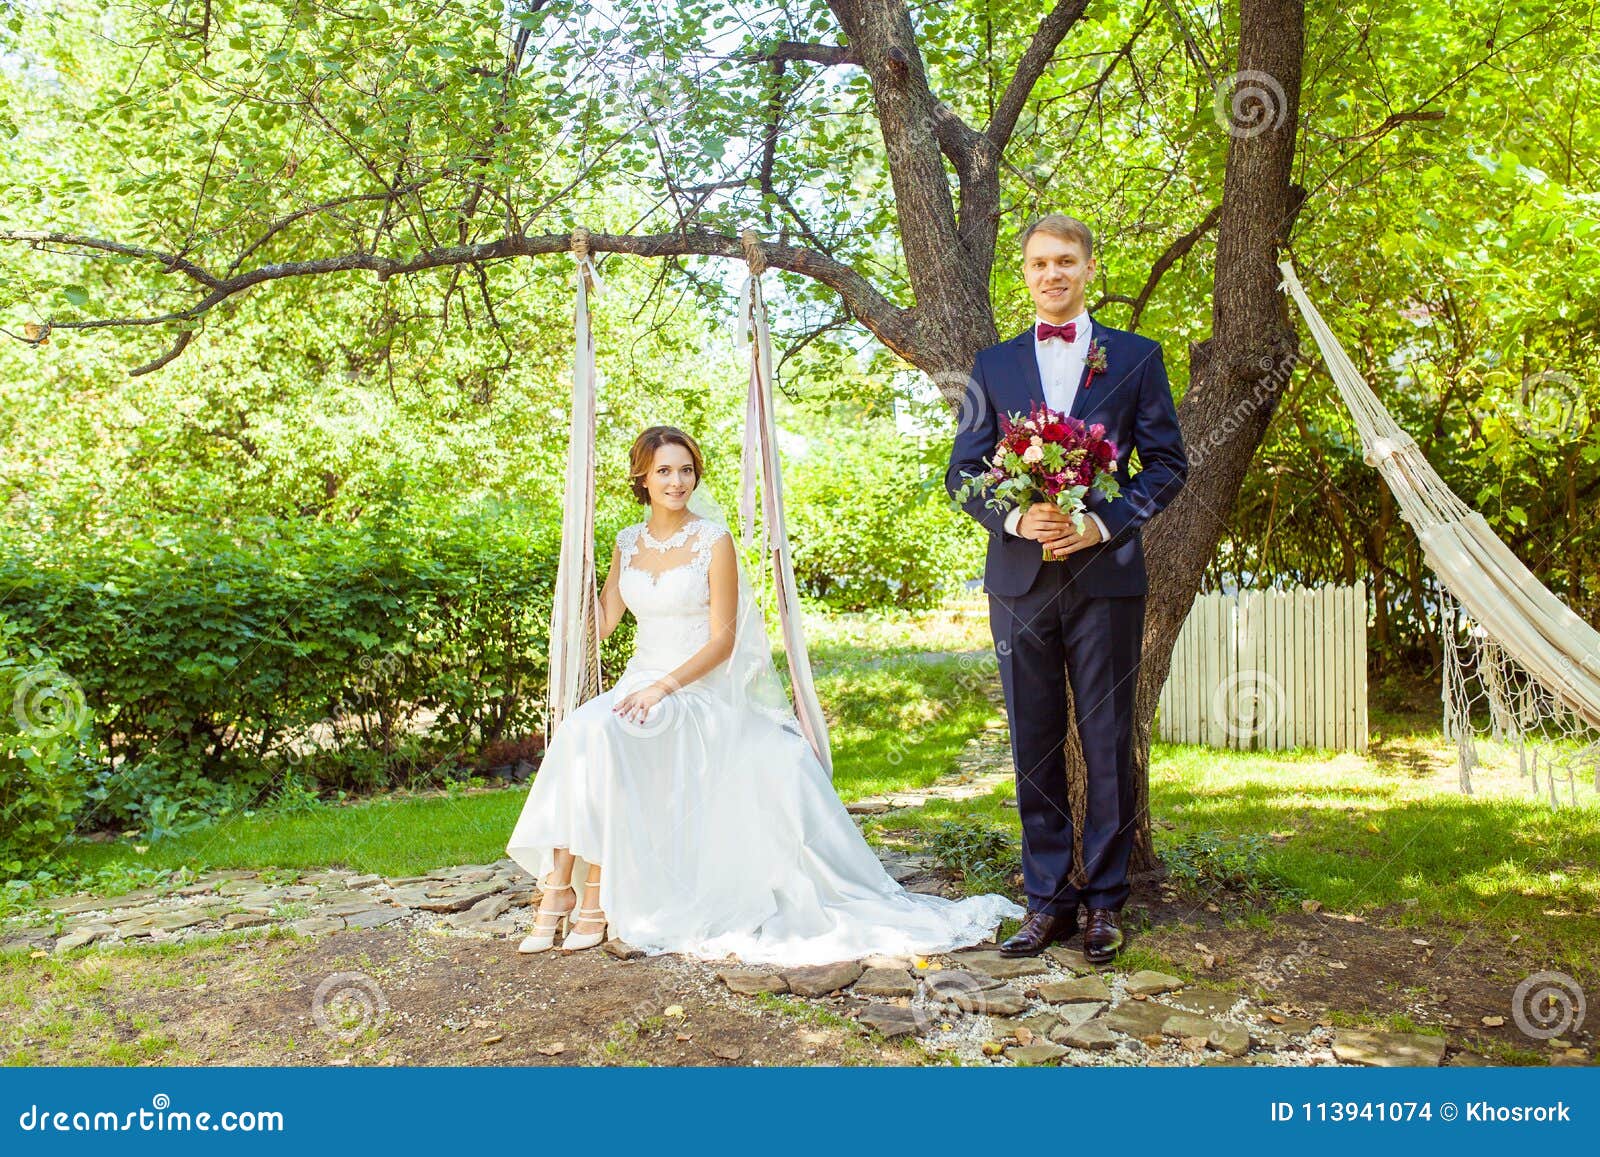 wife and husband swing hot photo